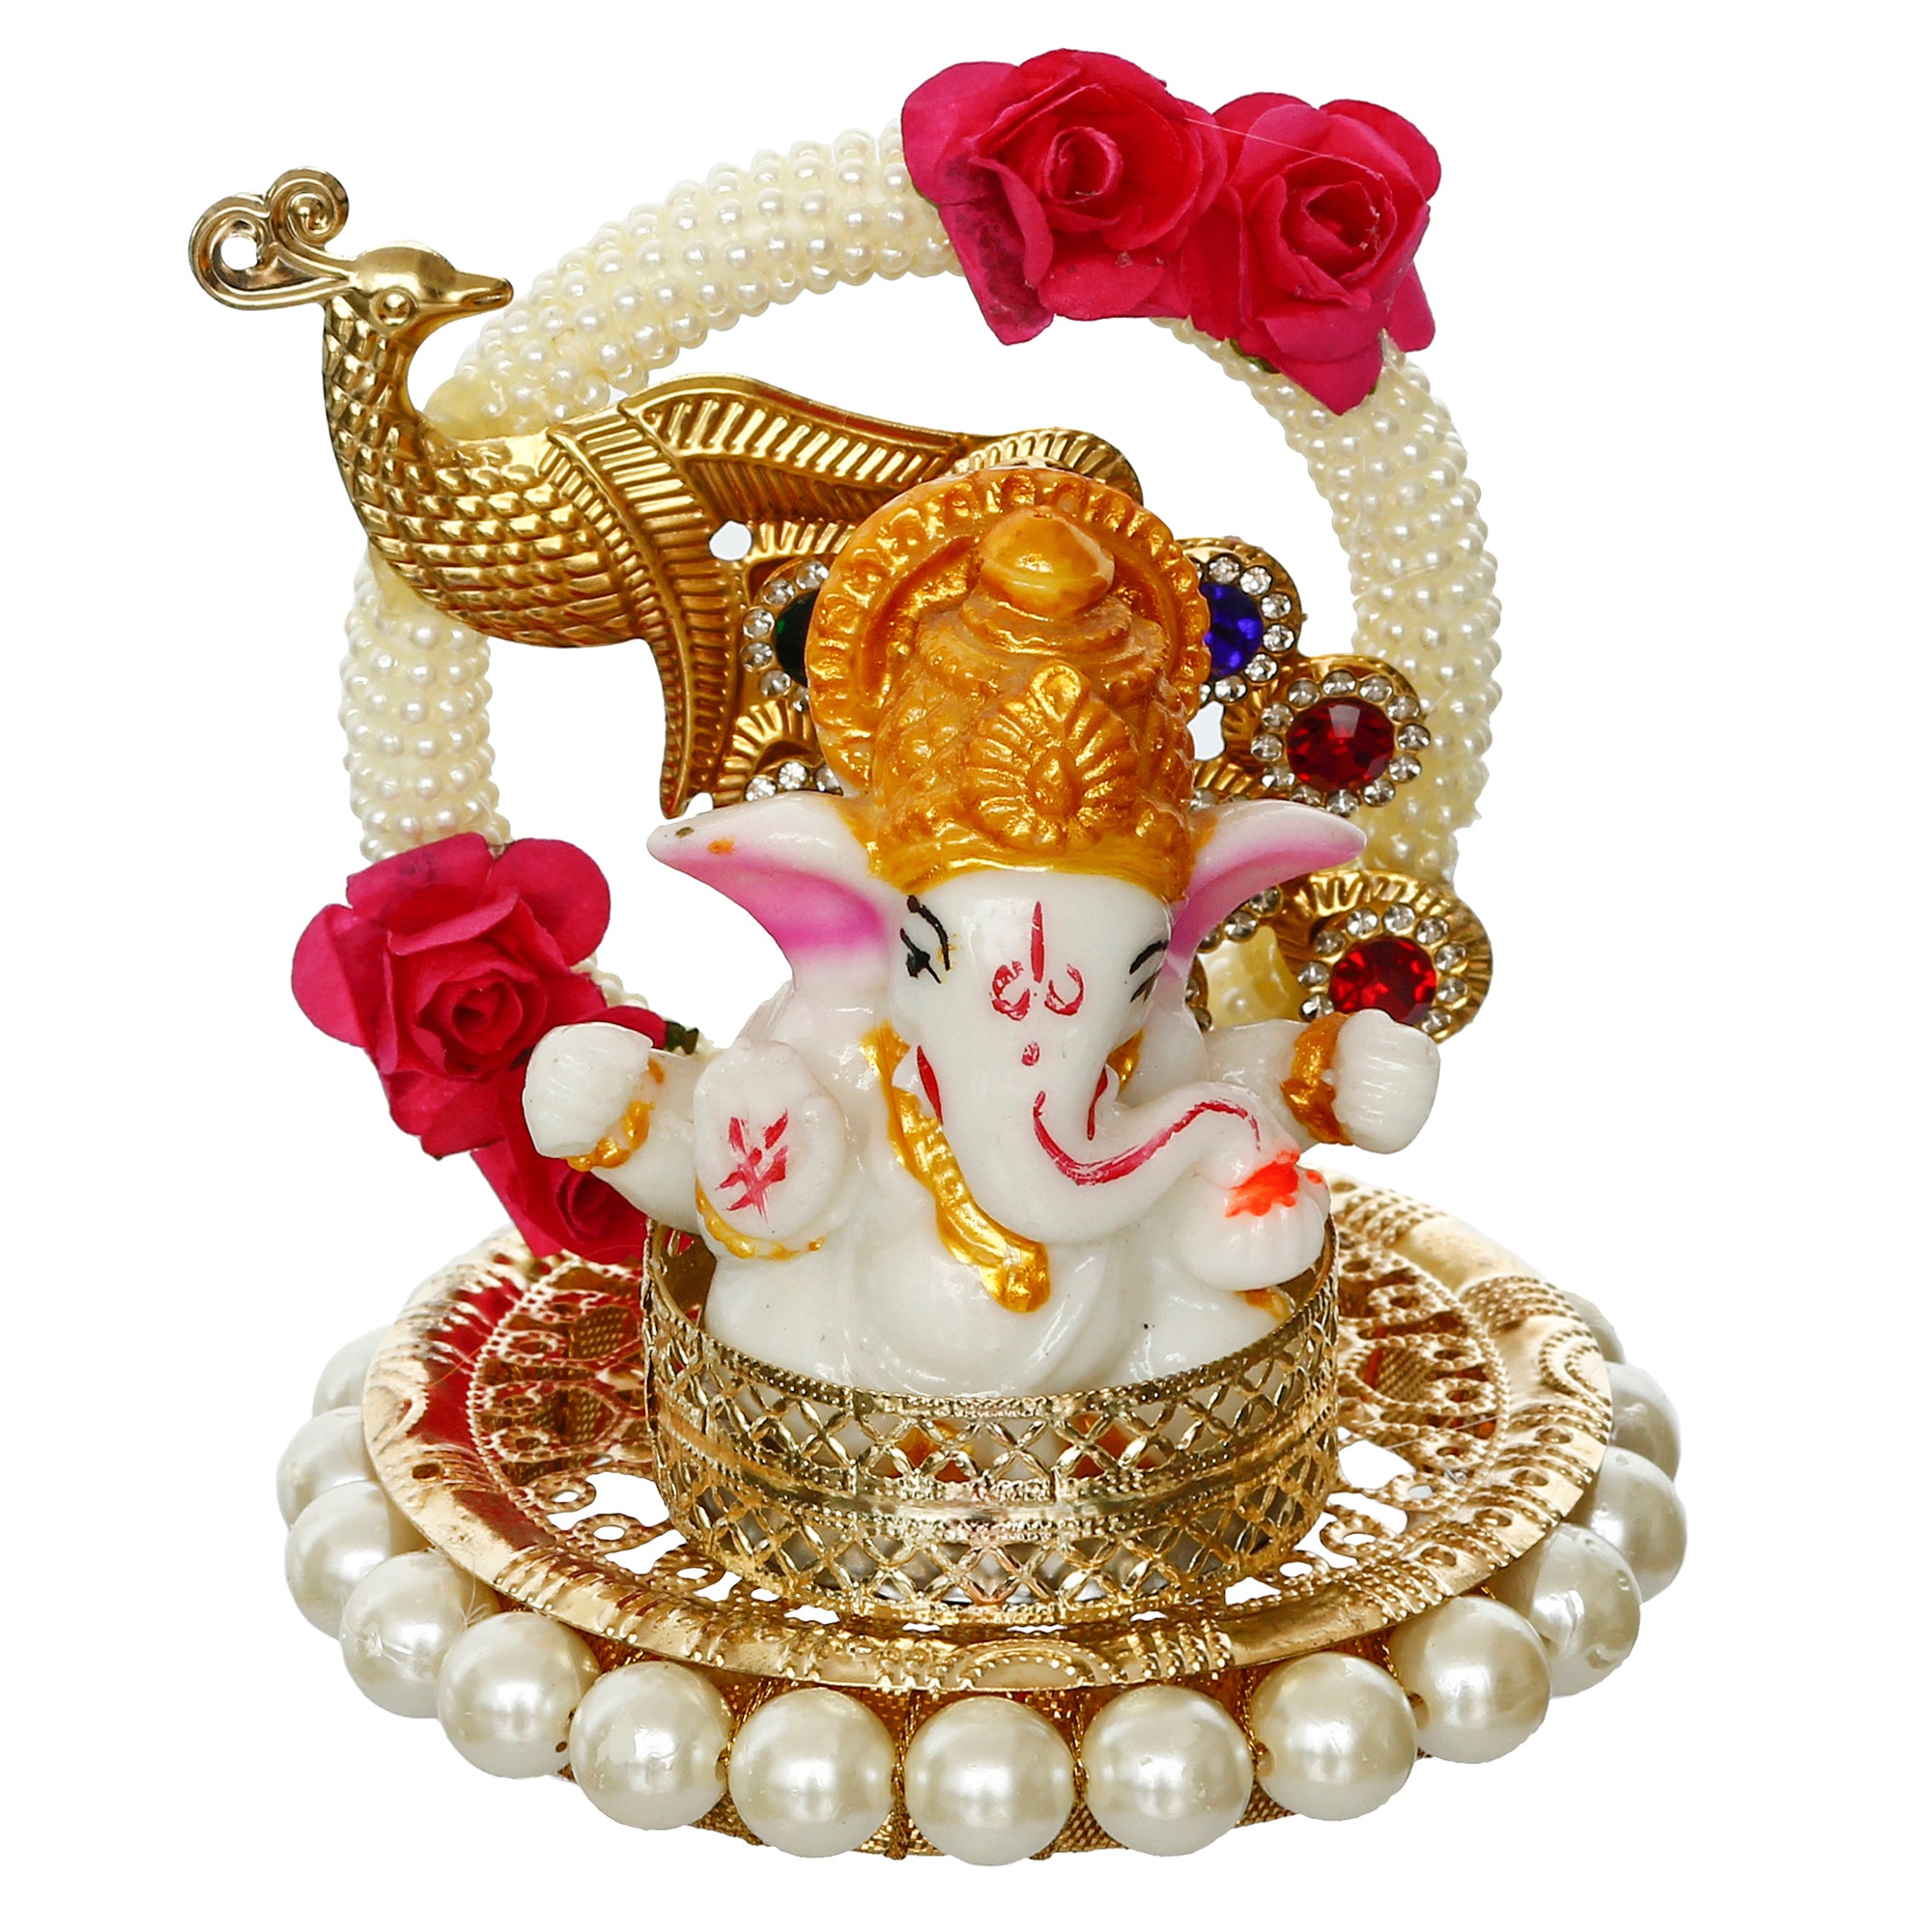 Lord Ganesha Idol On Peacock Design Decorative Handicrafted Plate For Home/Temple/Office/Car Dashboard 4